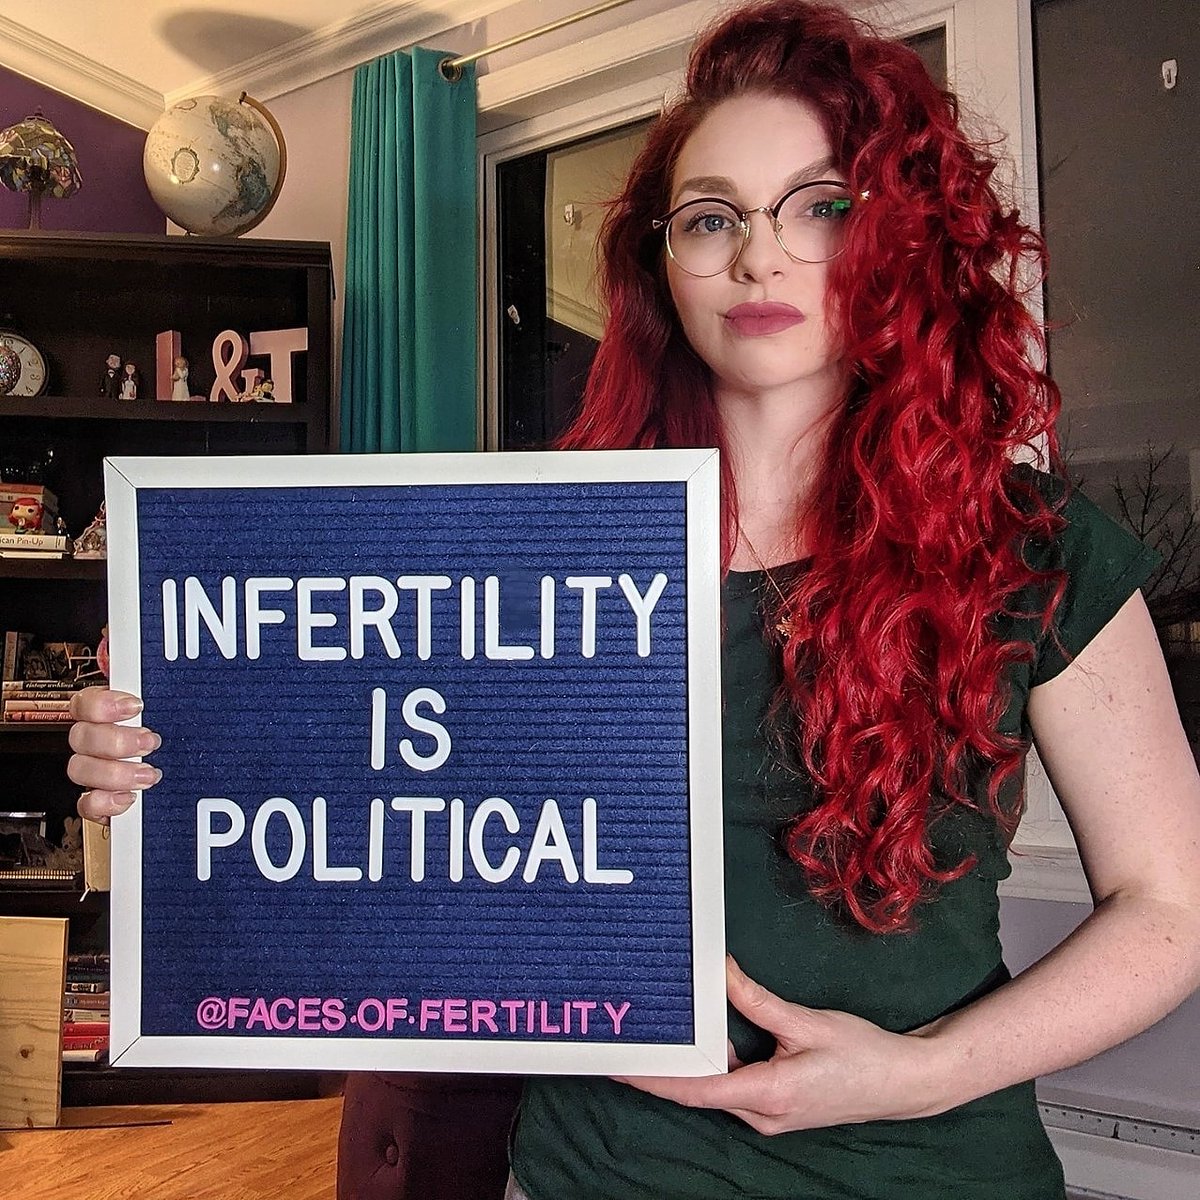 This is a public address to the politicians of Newfoundland and Labrador. I want you to know that this province is desperately in need of expanding it's fertility services, and we need the government to step up to the plate and help those of us who need it. A thread. /1